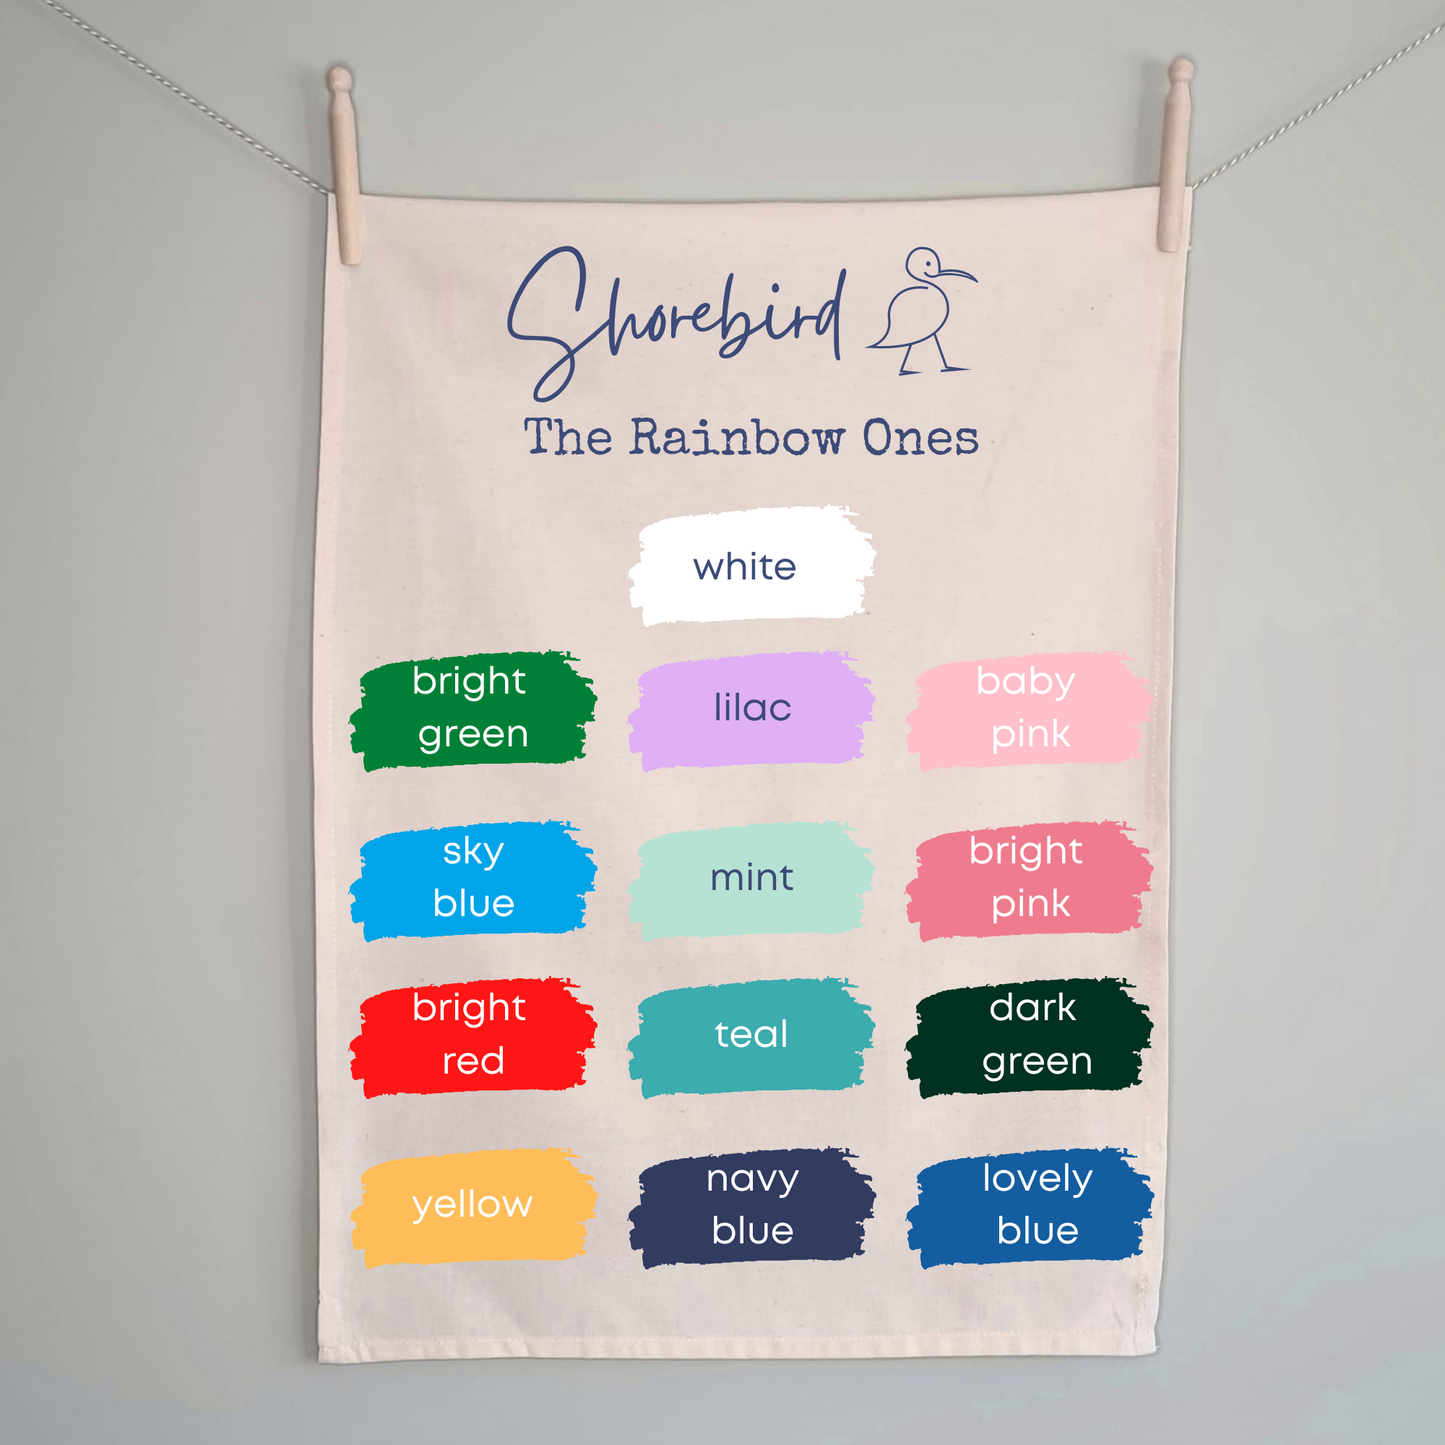 You Are Going To Be A Grandmother Tea Towel - 100% Organic Cotton